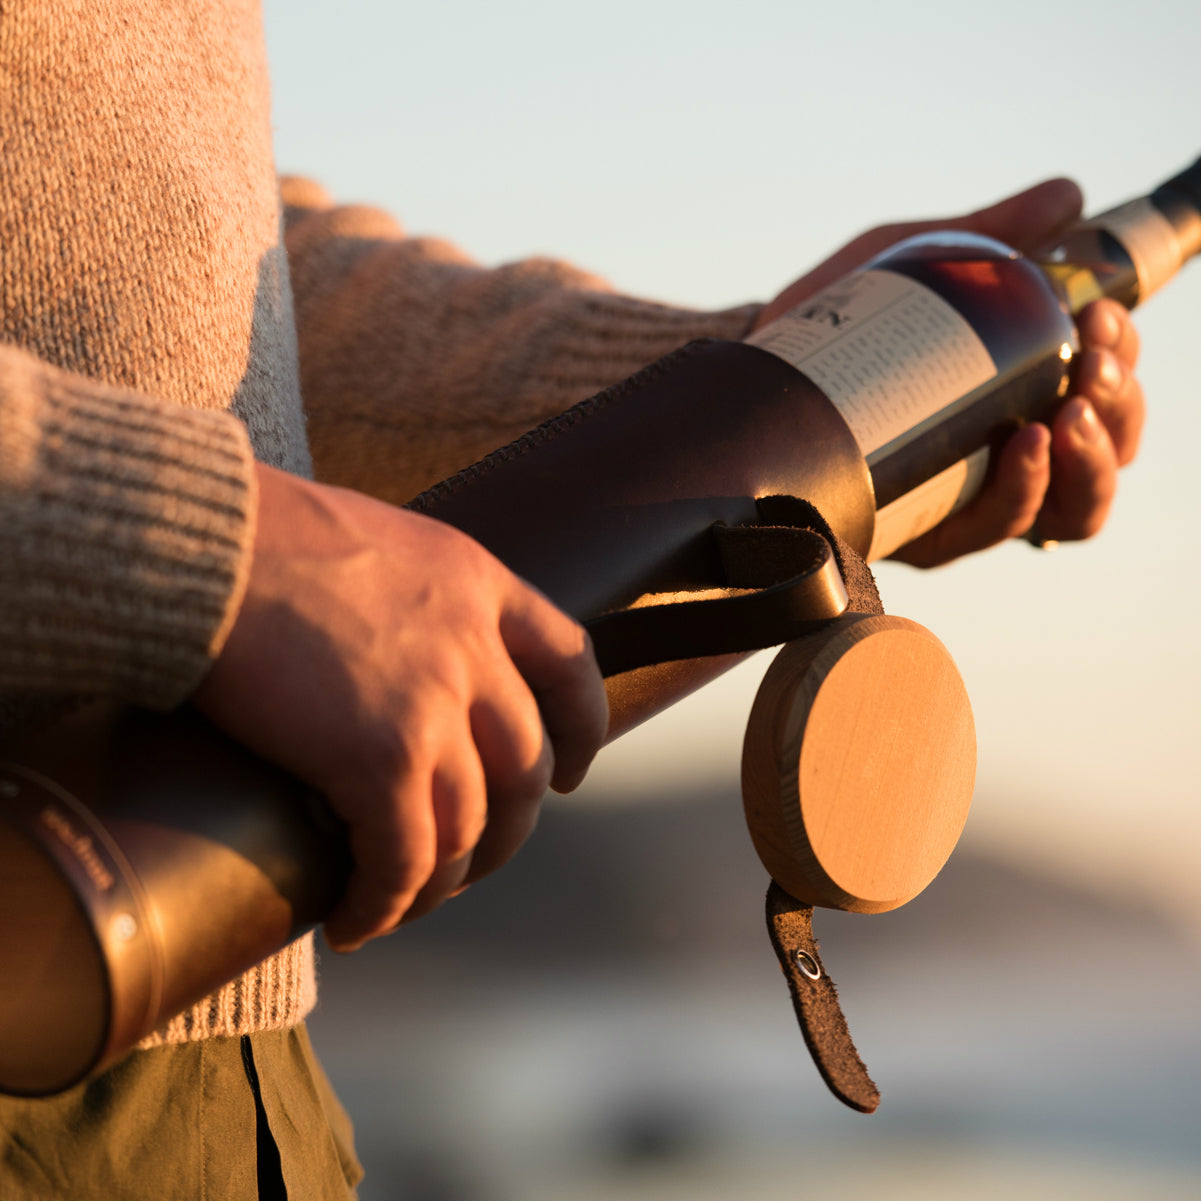 A man in a tweed sweater is pulling a bottle of Oban scotch whisky out of a handcrafted leather tube with an attached wood lid at sunset on the beach